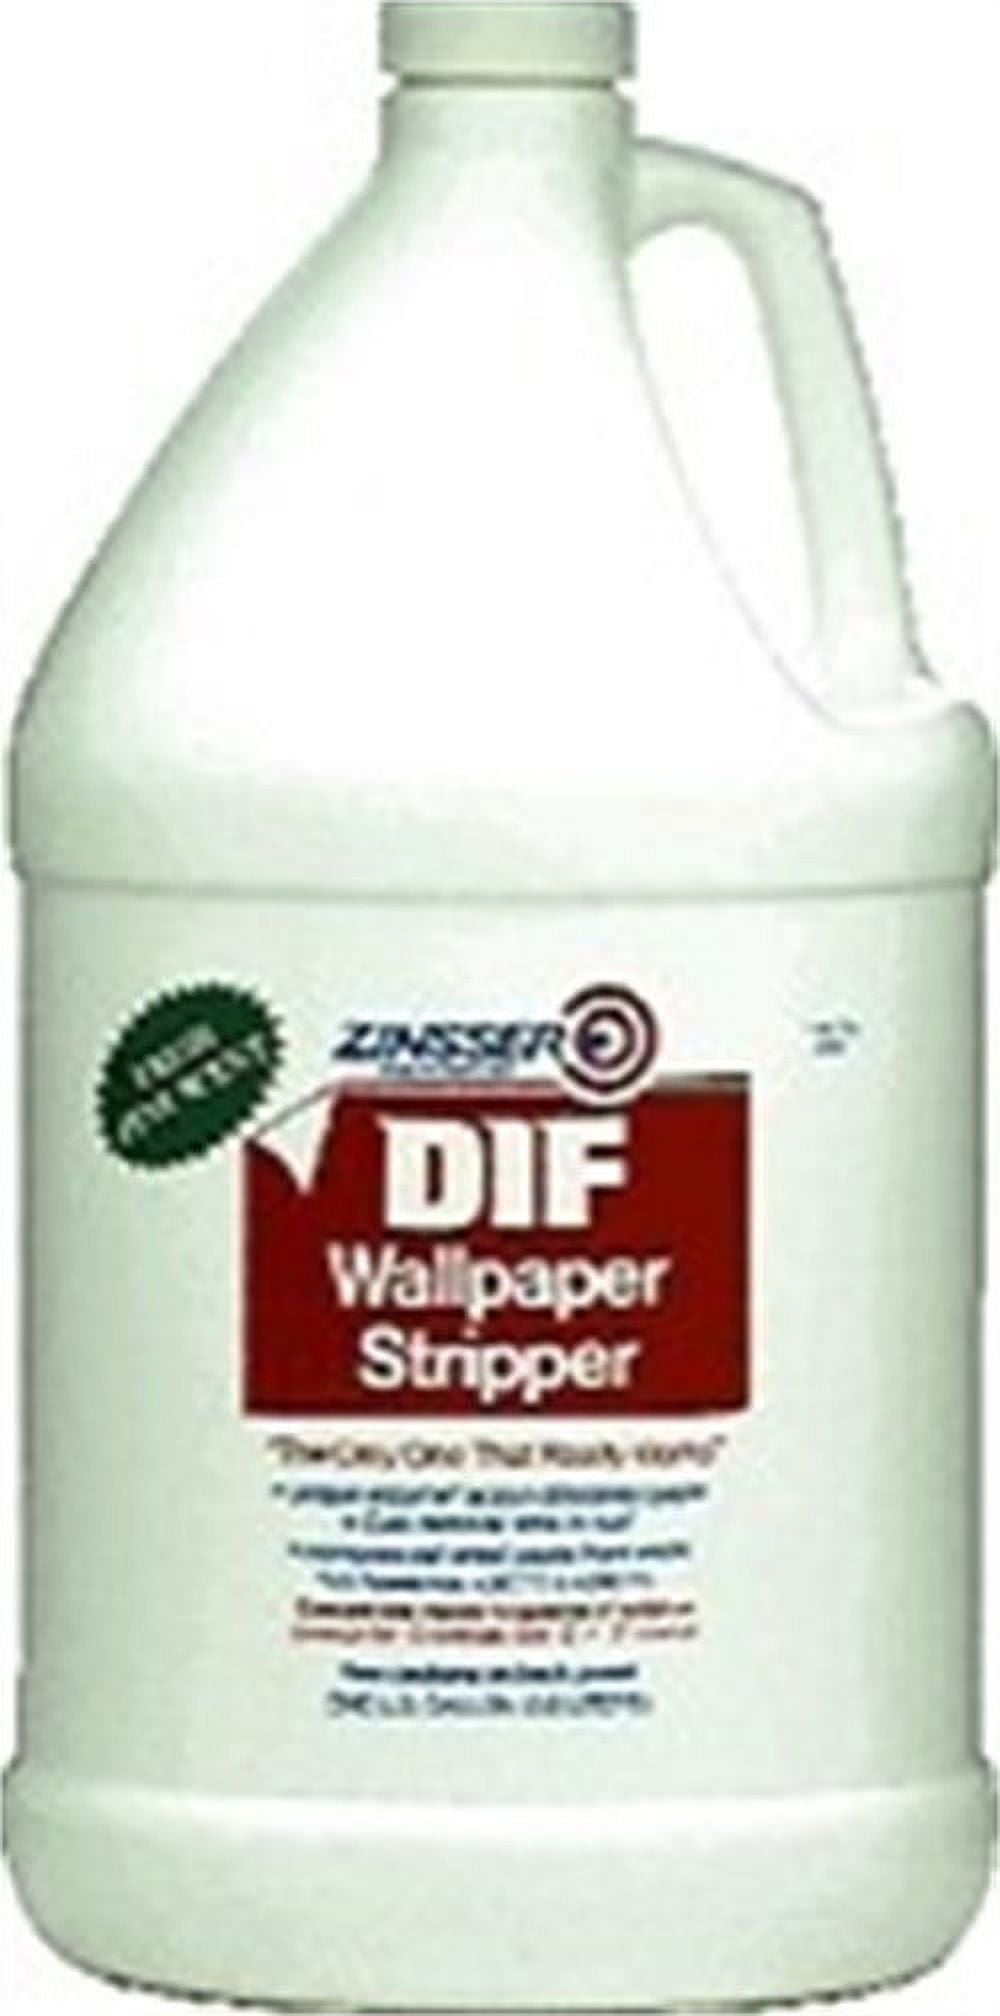 1 gal. DIF Wallpaper Stripper Concentrate (4-Pack)